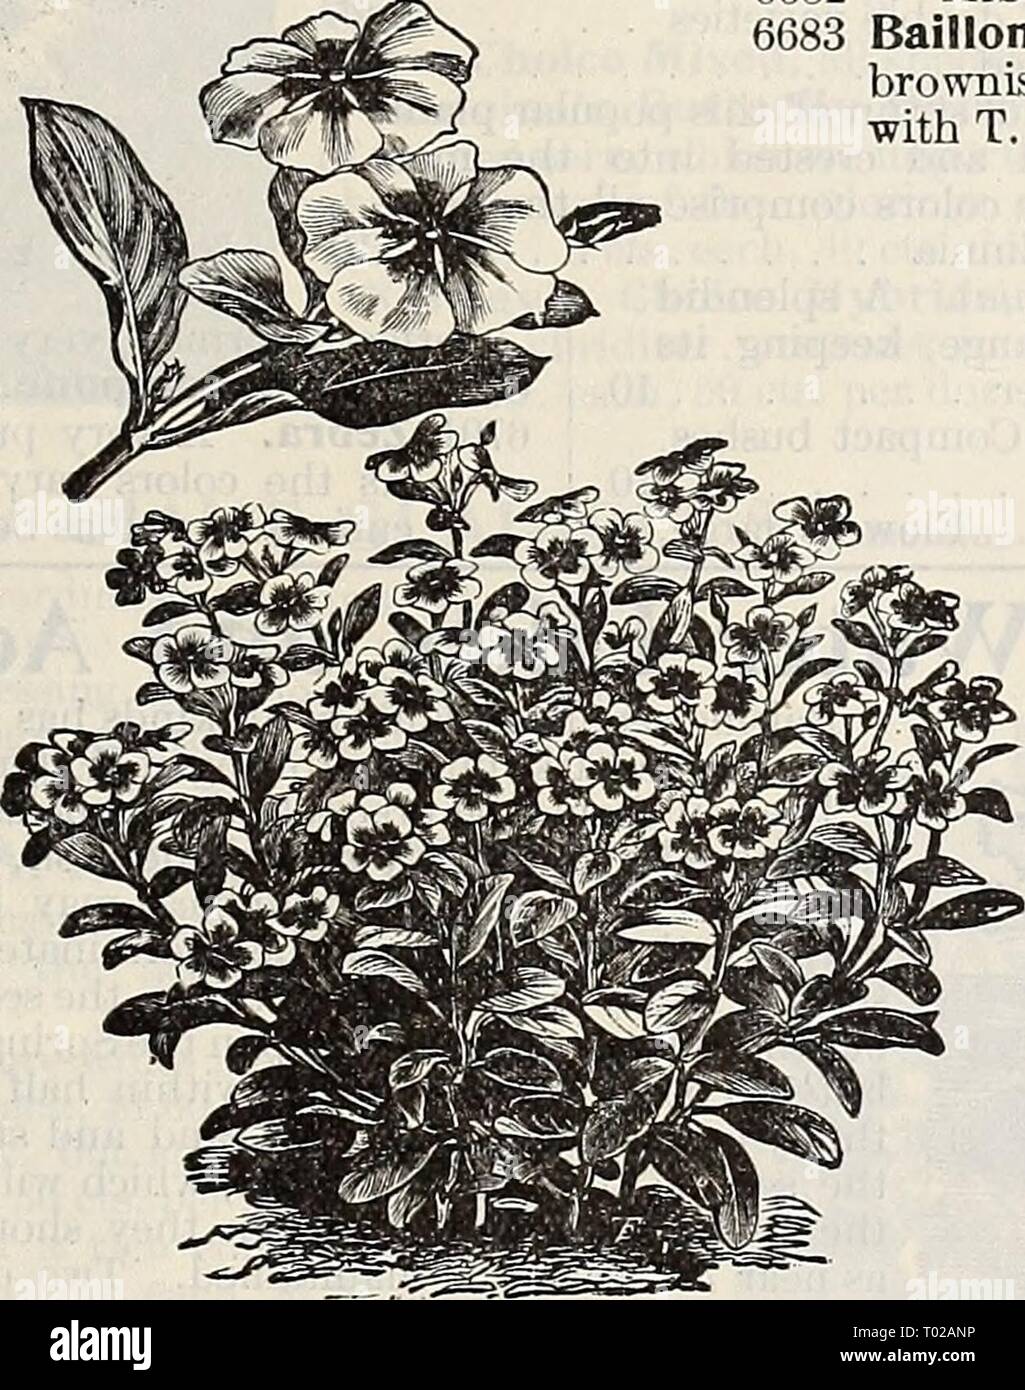 Dreer's garden calendar : 1897 . dreersgardencale1897henr Year: 1897  Tropaaolum Lobbianum. Vinca. Ornamental free-blooming plants ; they flower from seed, if sown early, the first season, continuing until frost; or they may be potted and kept in bloom through the winter ; 2 feet. PER PKT. 6713 Rosea. Rose, dark eye . 10 6714 Alba. White, crimson eye 10 6715 AlbaPura. Pure white . 10 6720 Mixed. Per oz., $1.00 . 10 LEMON VERBENA. 6708 A 1 o y s i a Citriodora. Lemon-scented foliage . 10 TROP/EOLUM (Lobb's Nasturtium). The brilliance and profusion in blooming of the Lobbianum varieties render t Stock Photo